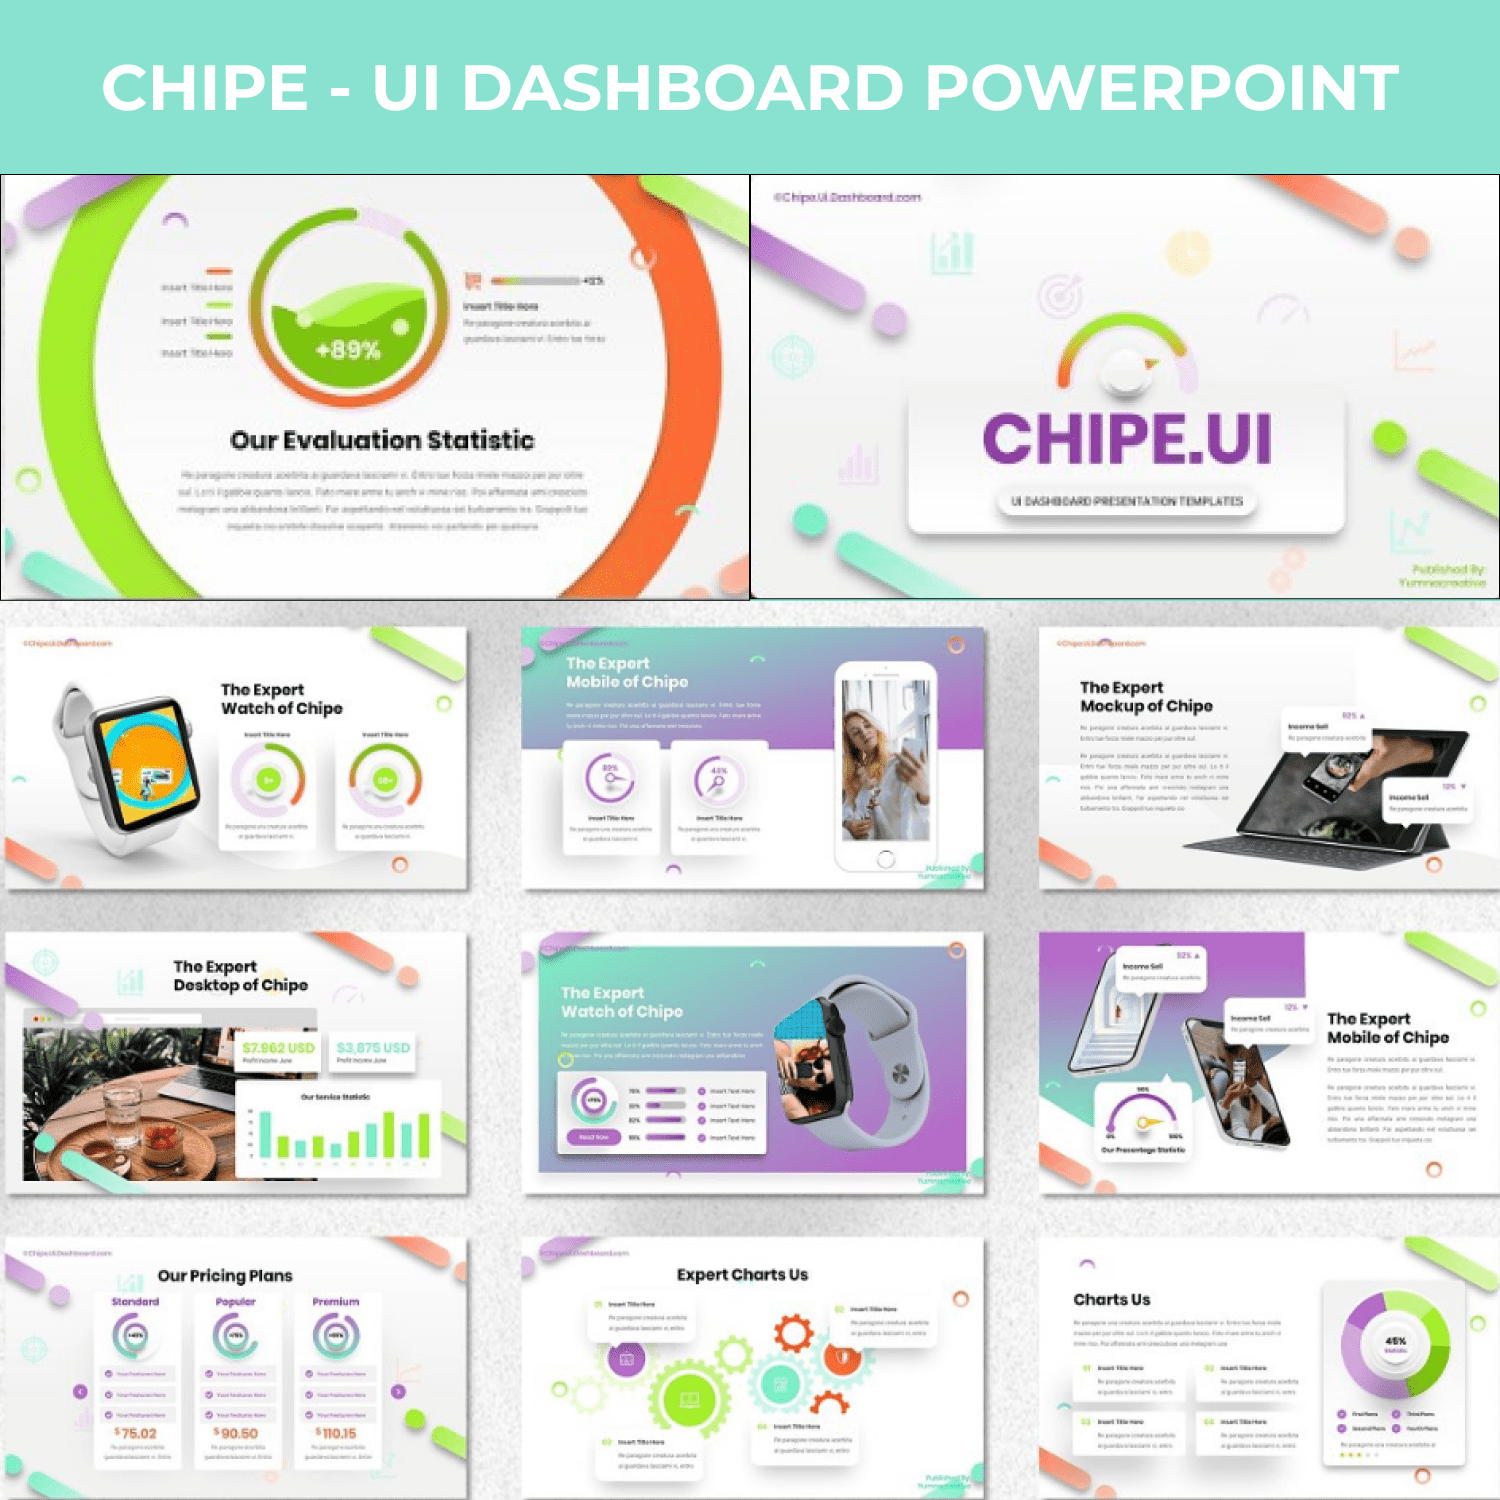 Chipe - UI Dashboard Powerpoint cover image.